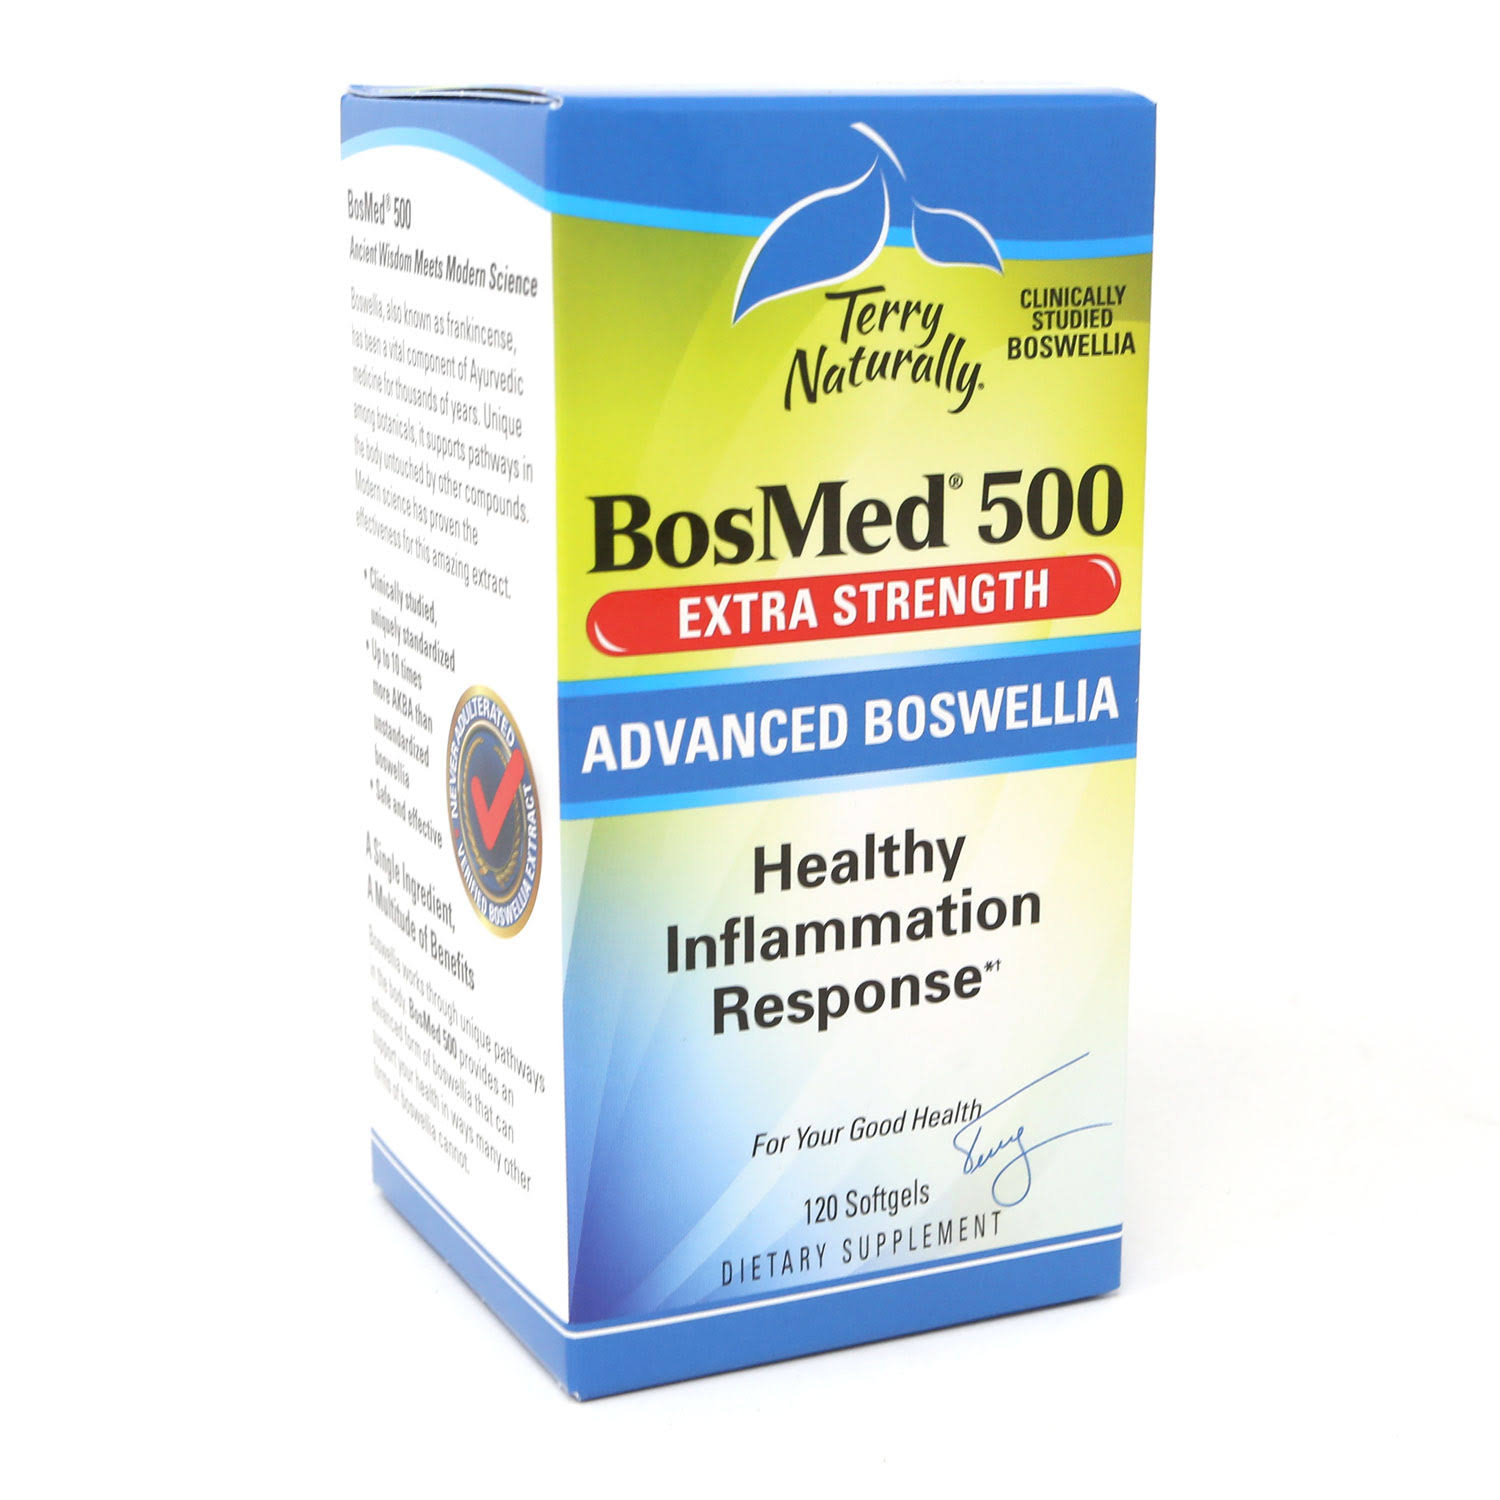 Terry Naturally BosMed 500 - 120 Softgels